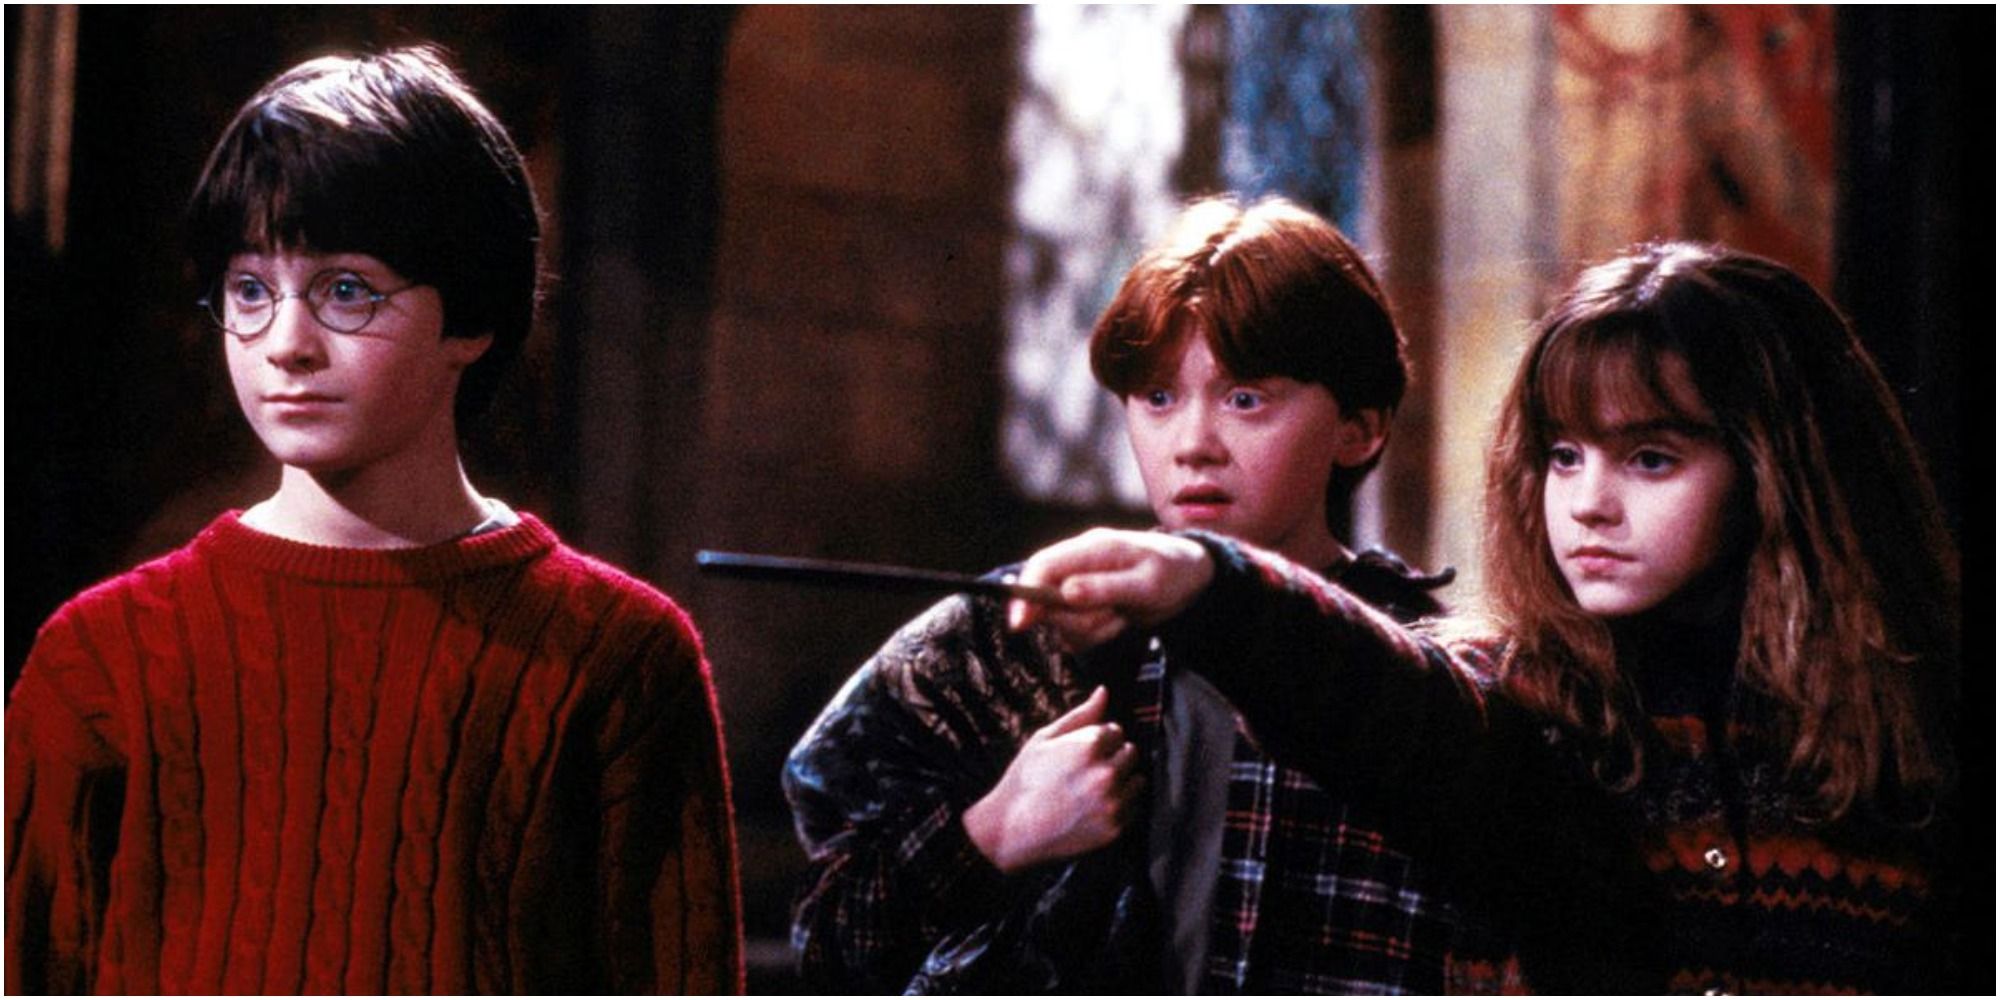 Harry Potter Every Movie Ranked Smallest To Biggest Budget